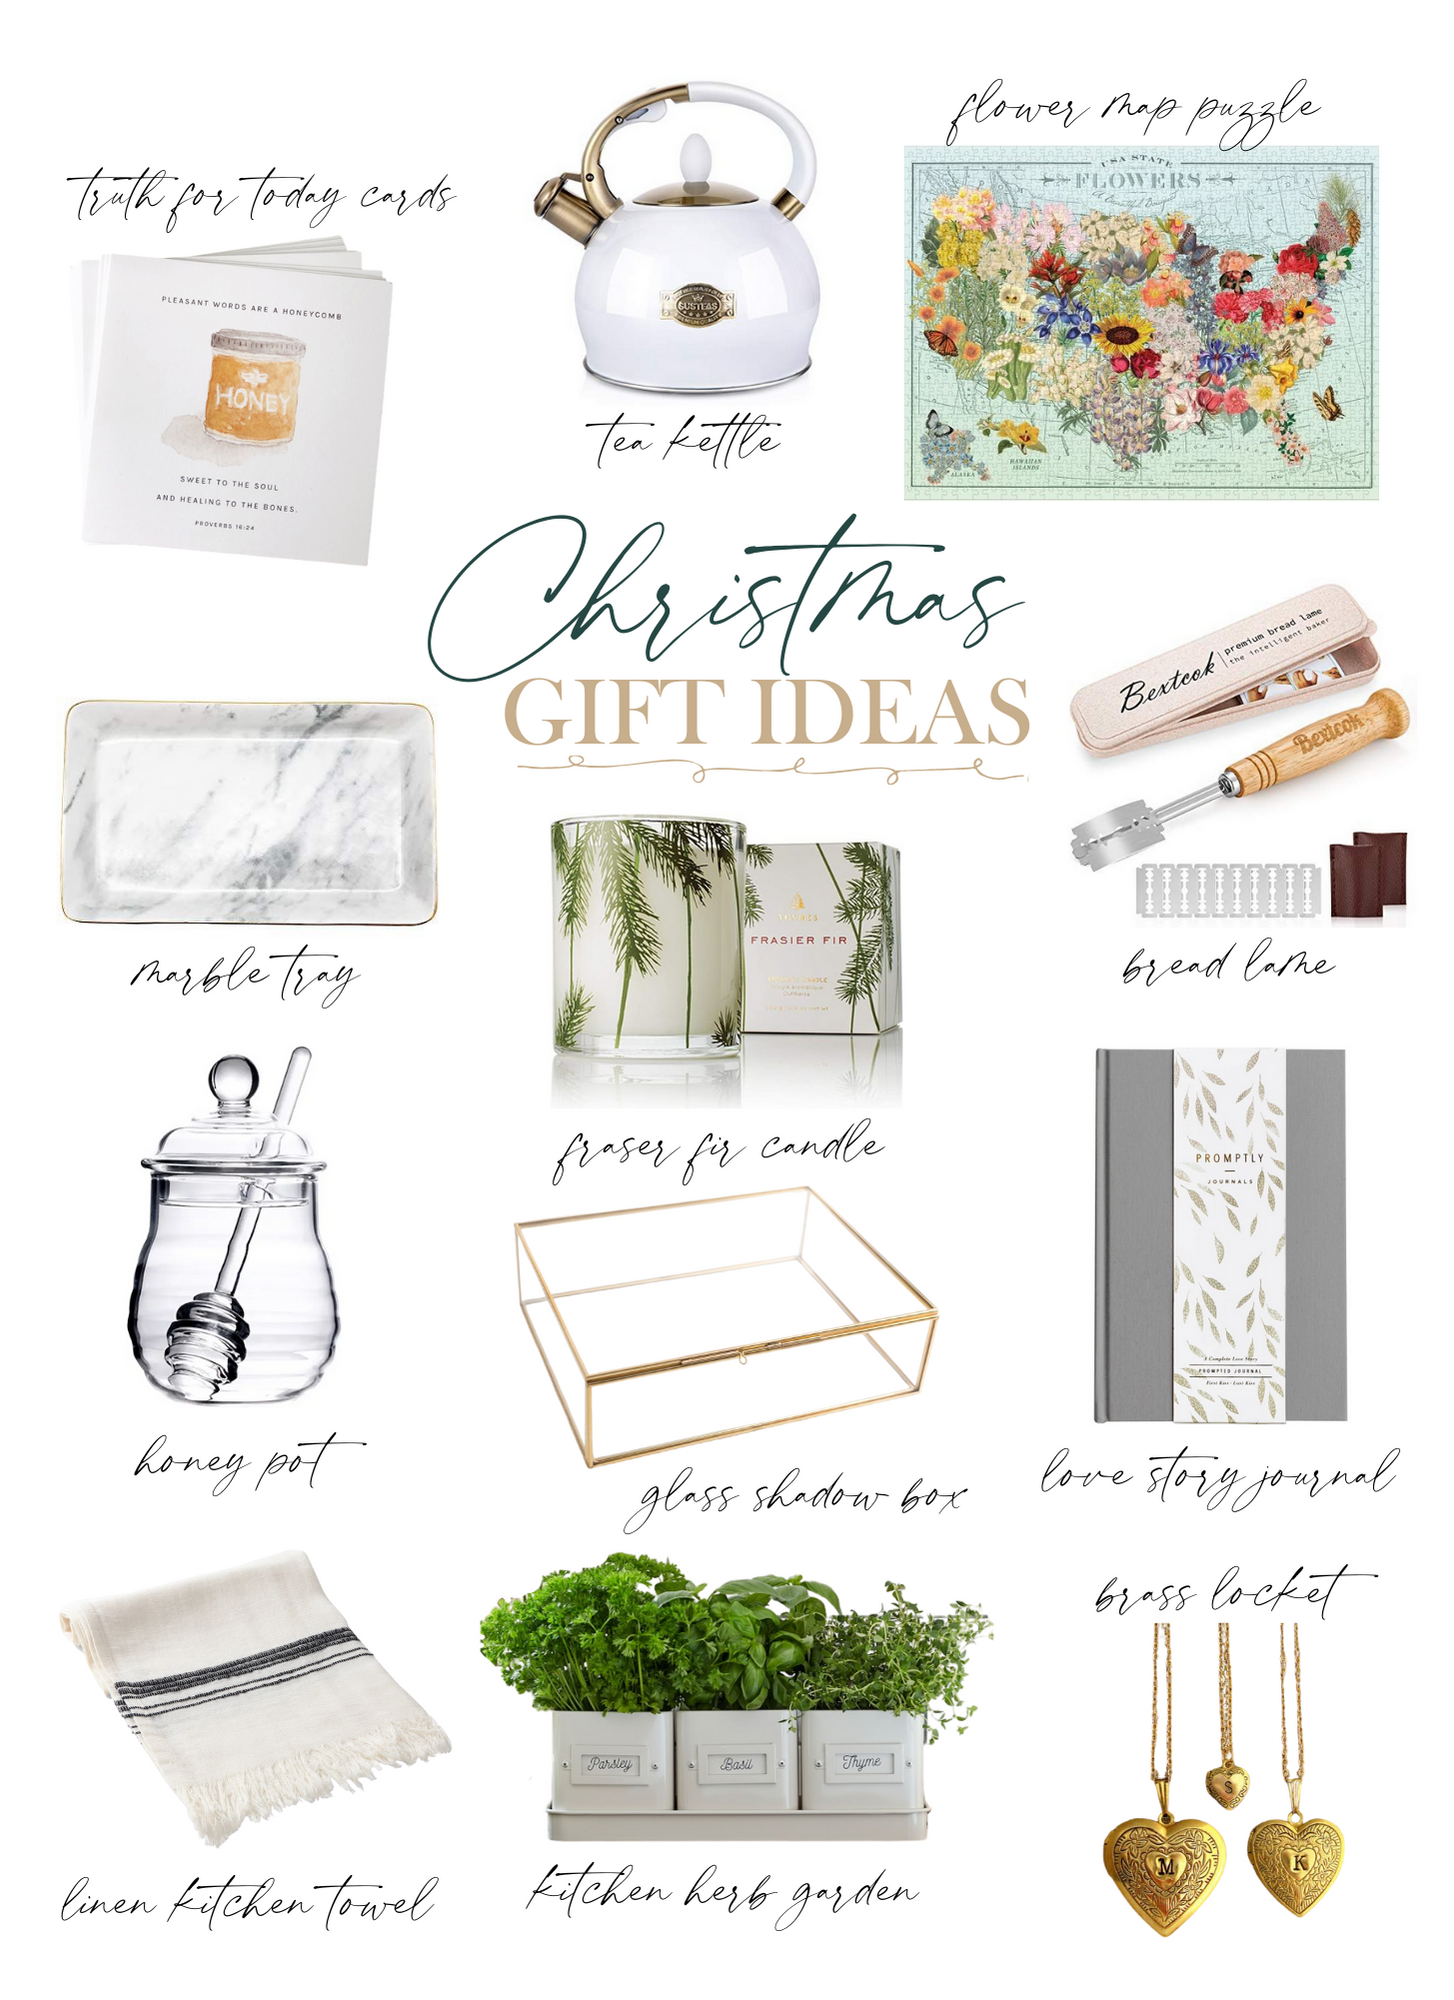 A collection of gift ideas to give this Christmas season.